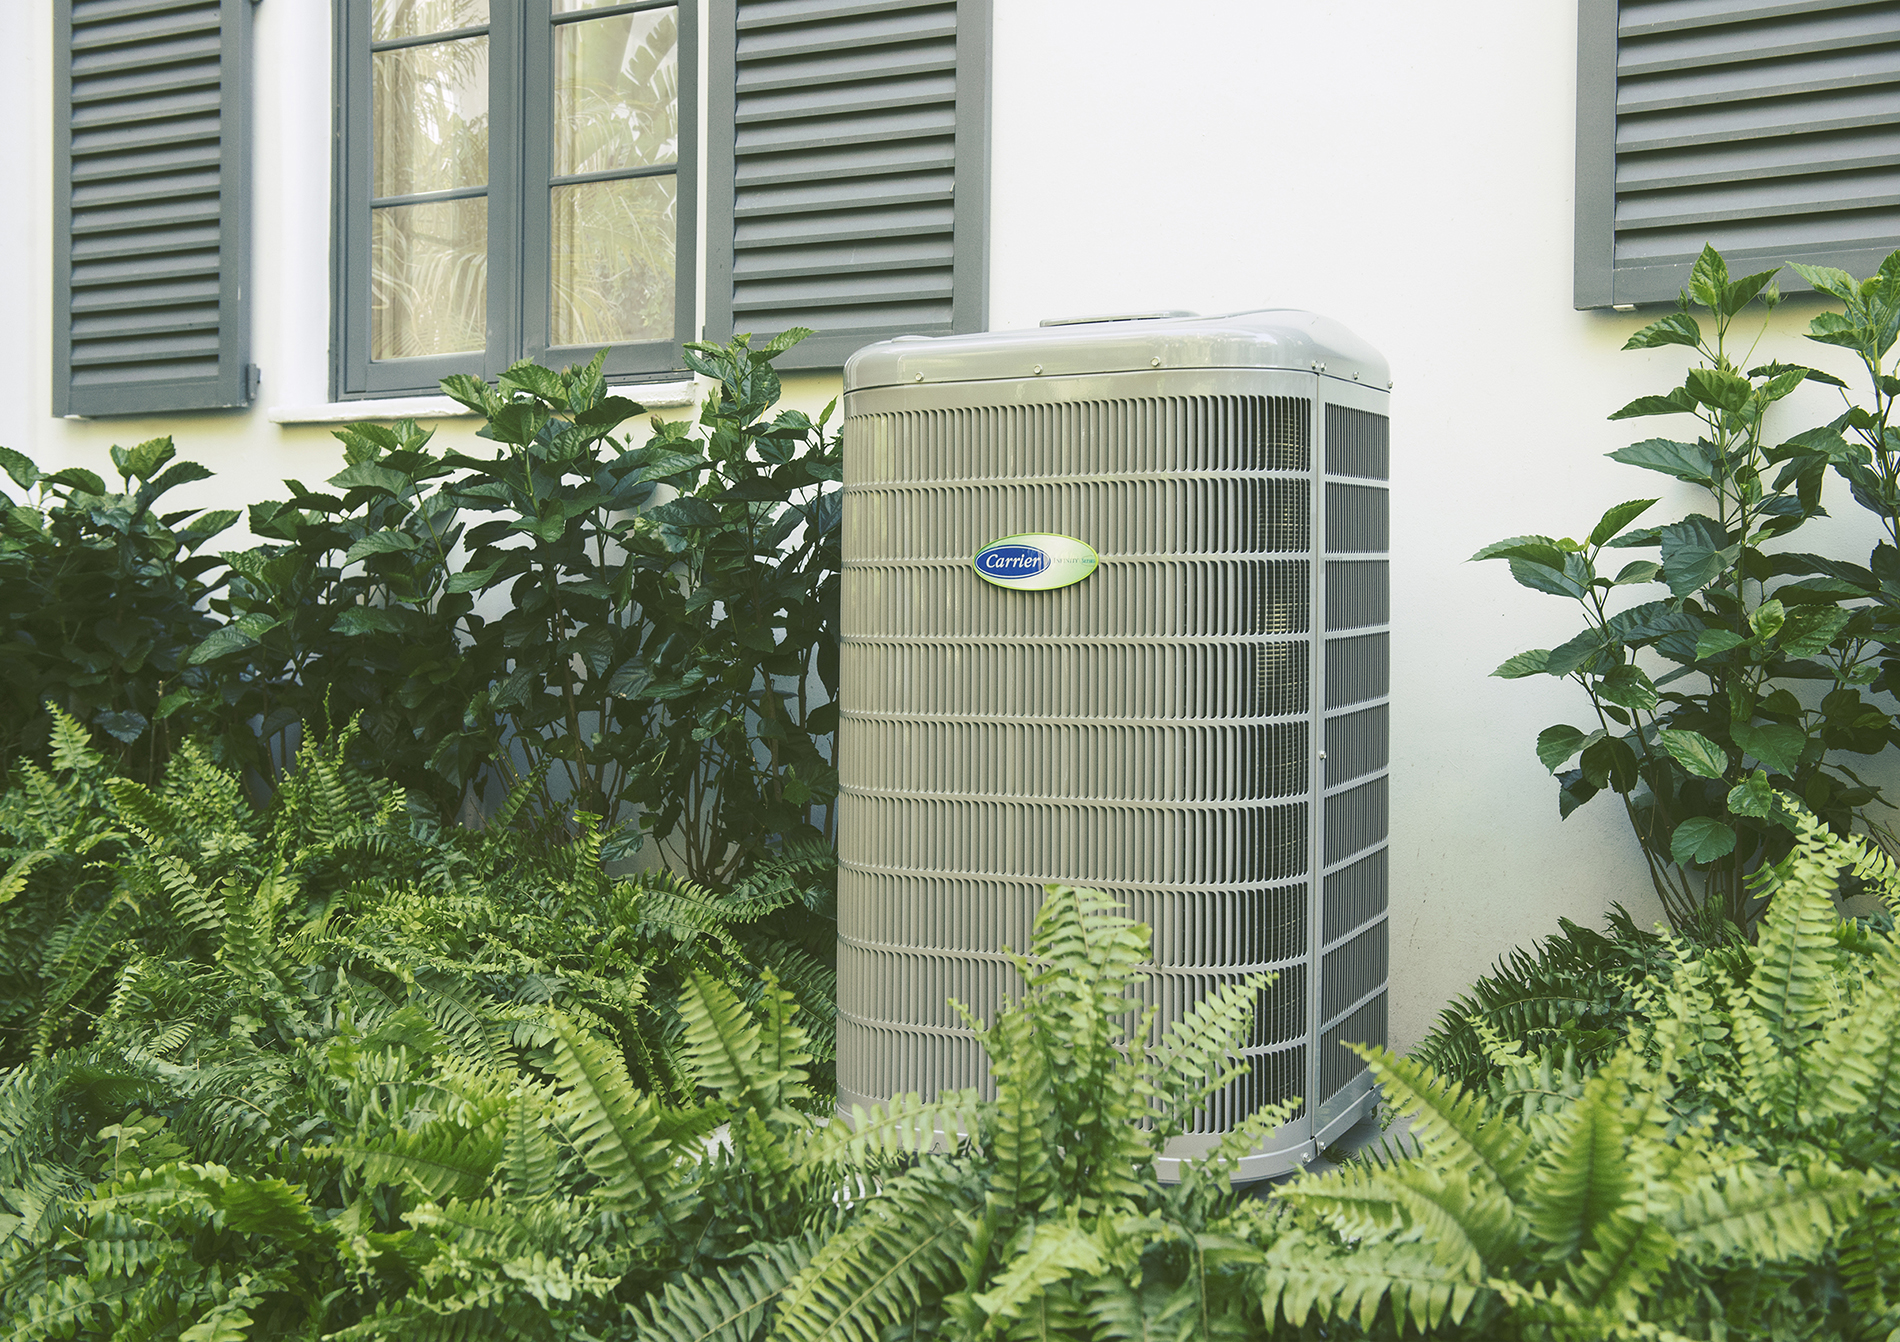 Genove Oil and Air provides customers with Complete Cooling Services; Installation of Central Air Conditioning, Ductless AC and Condenser Unit replacement. 